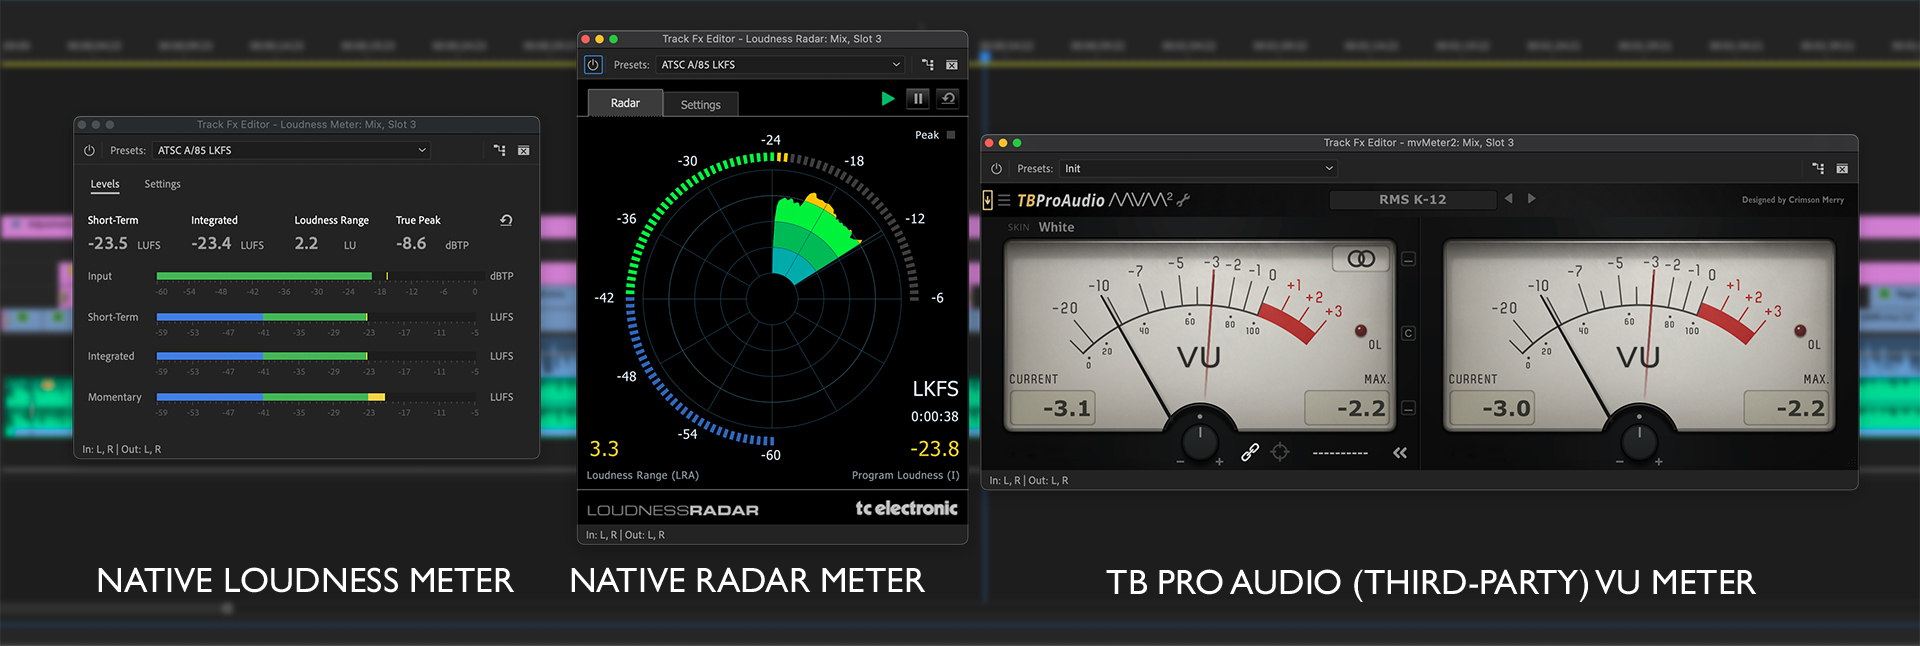 FabFilter Pro-MB Multiband Compressor for Top Quality Audio Mixes 17